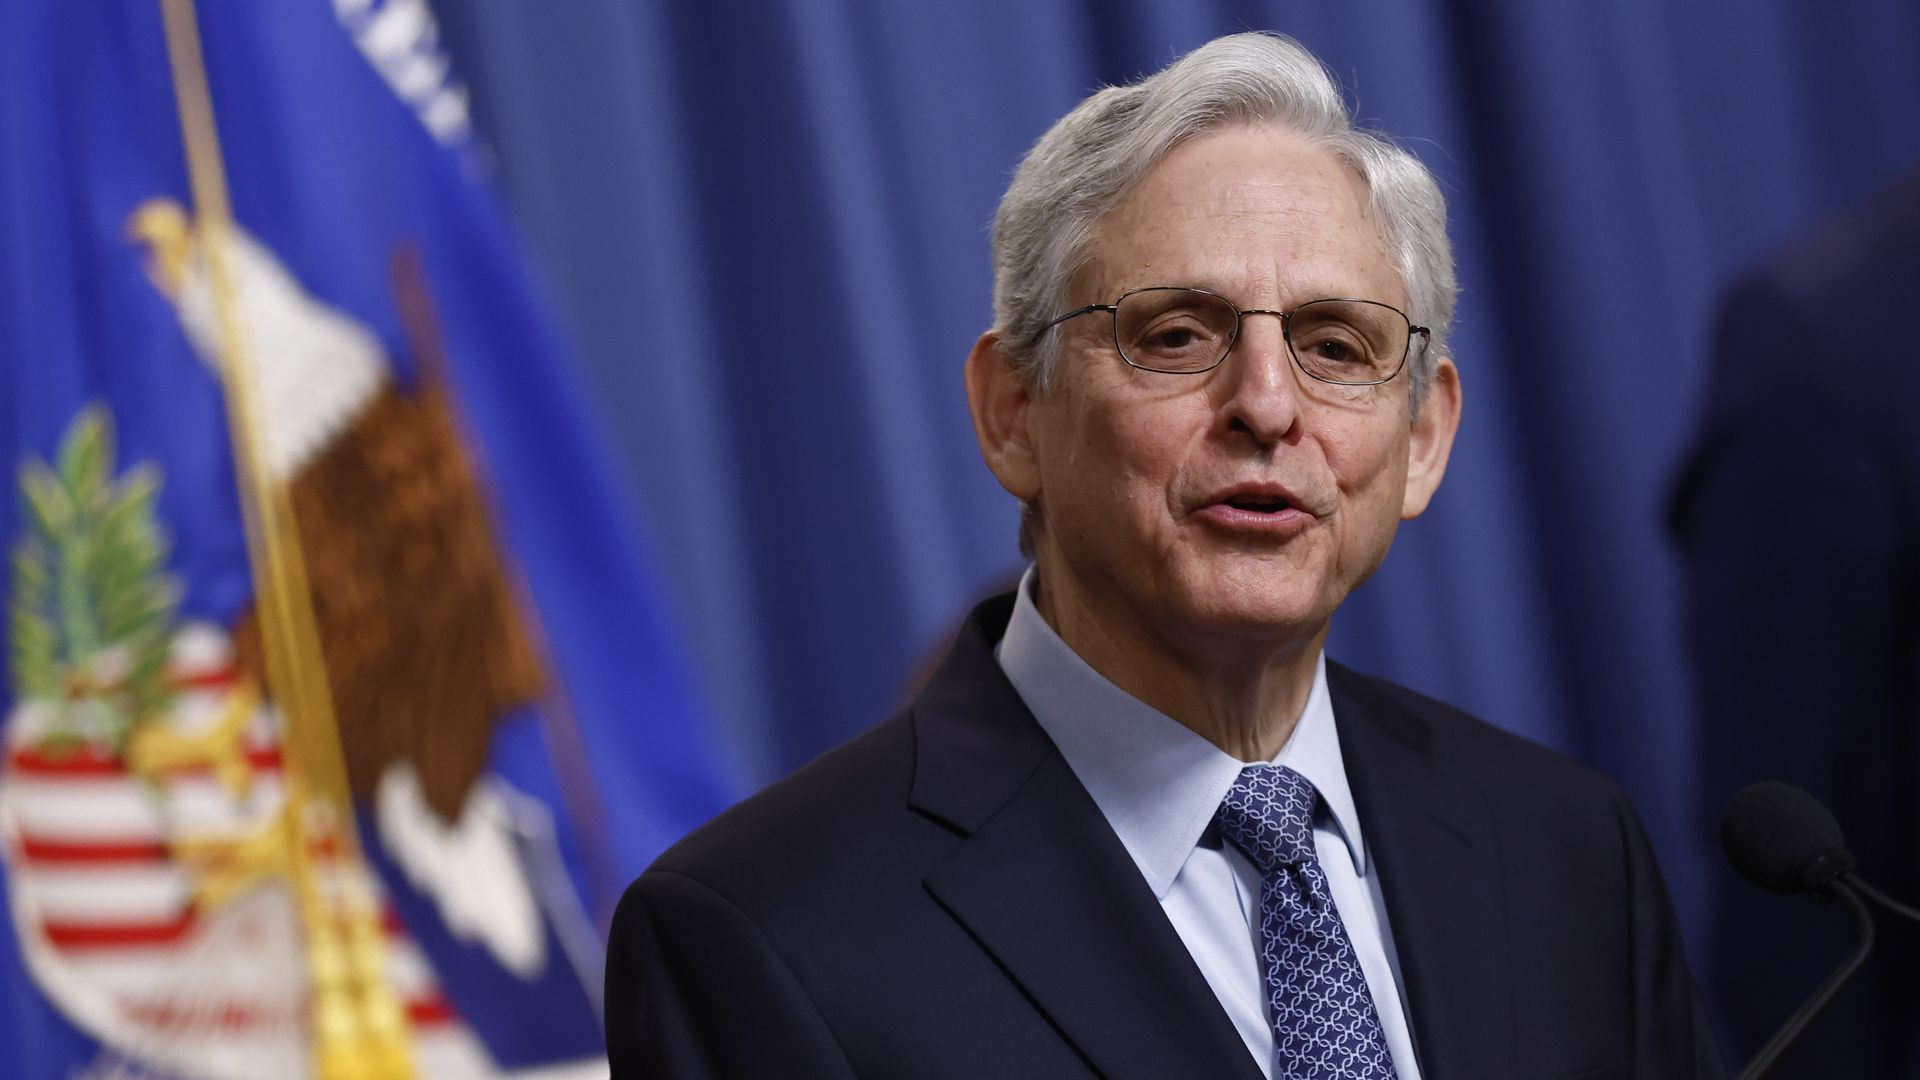 Merrick Garland, U.S. attorney general, speaks during a news conference at the Department of Justice in Washington, D.C., U.S., on Wednesday, April 6, 2022.